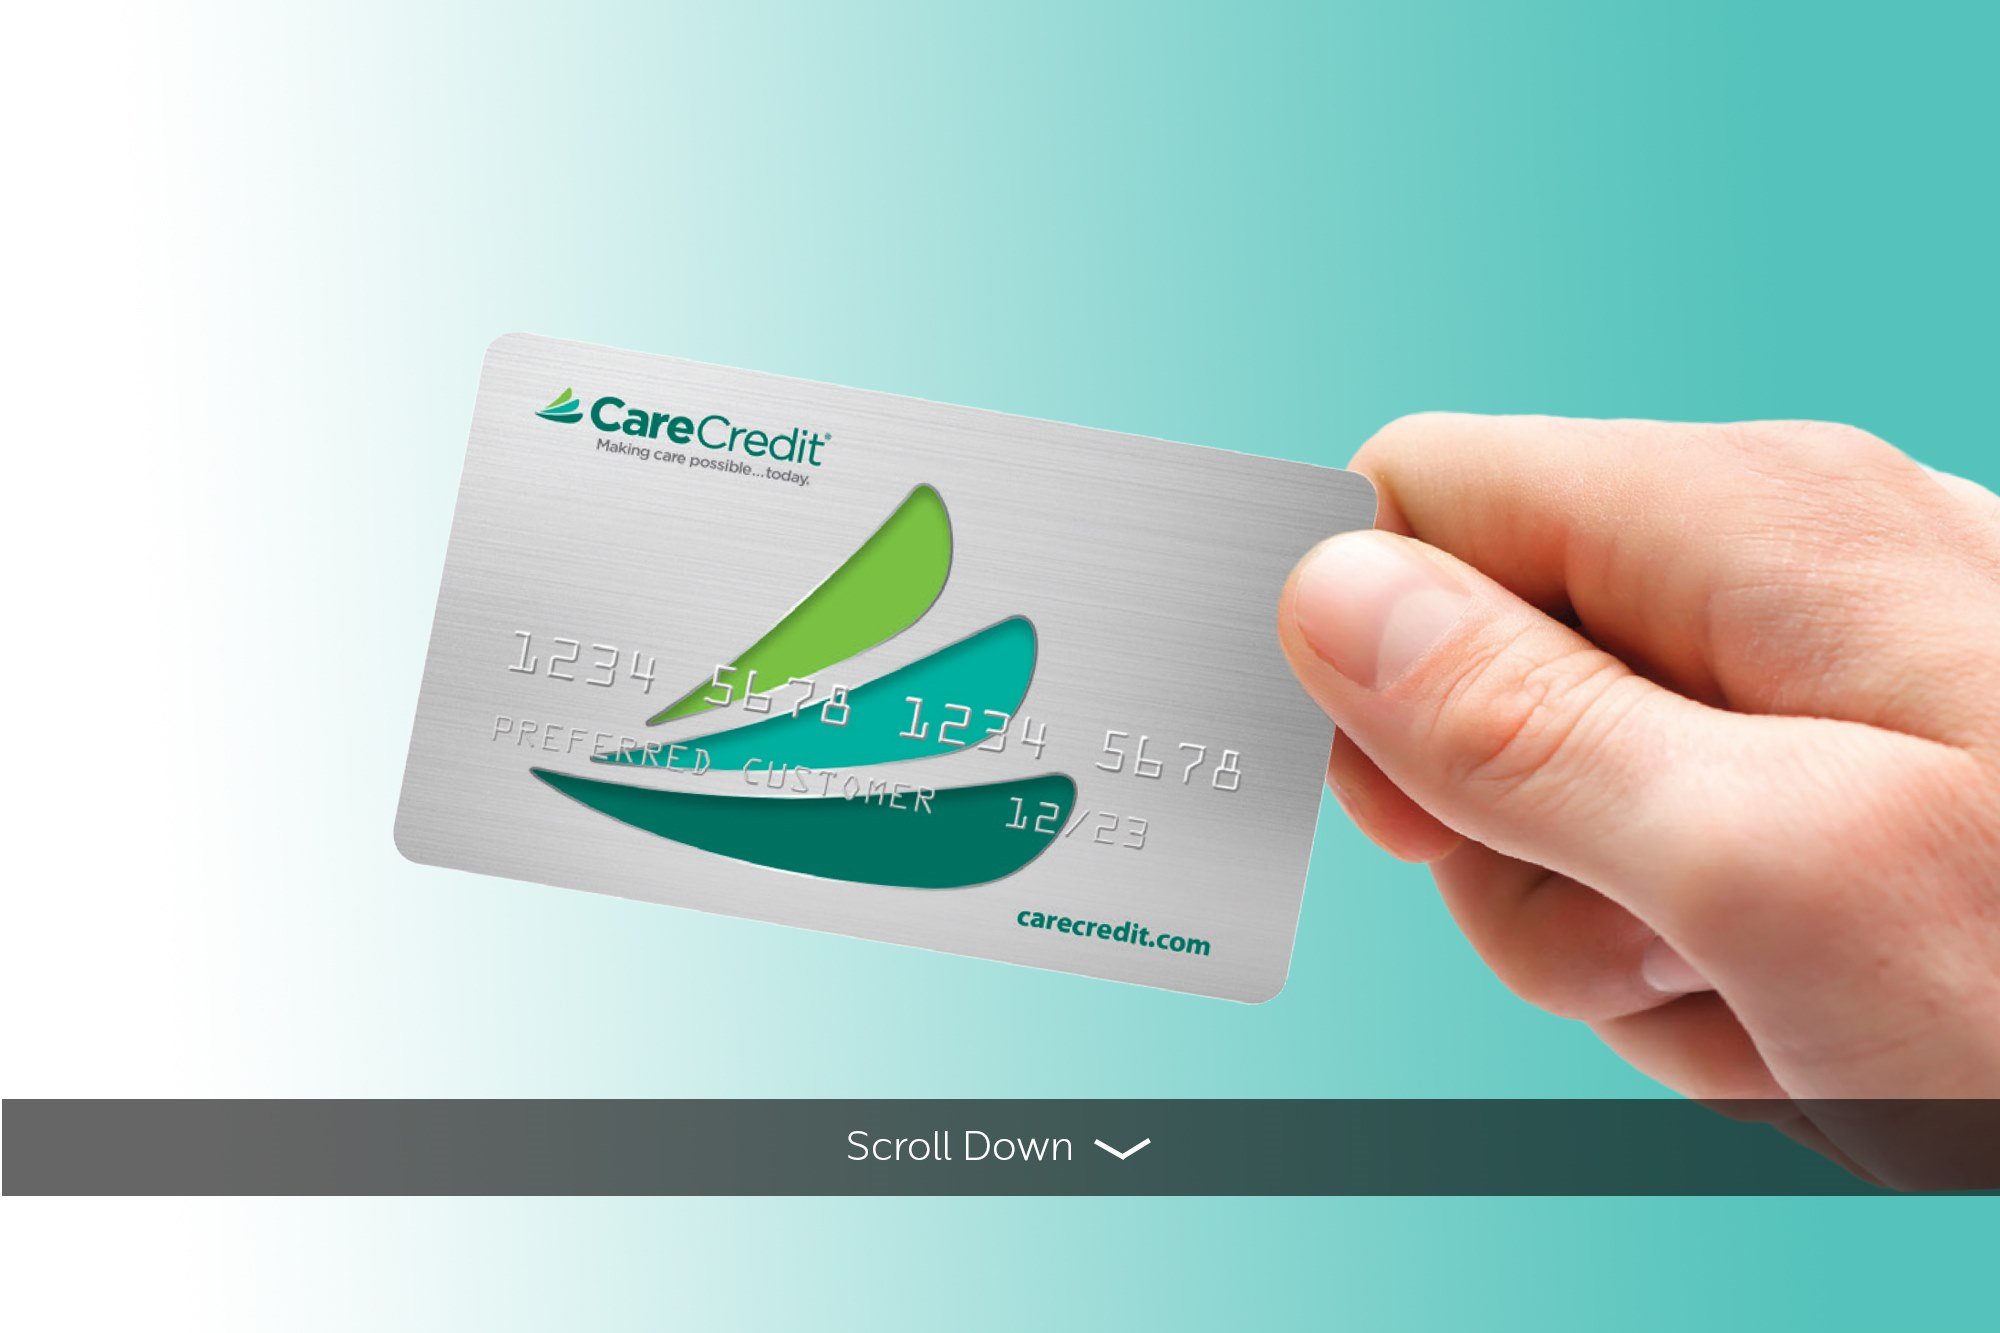 Health and Wellness Credit Card - CareCredit